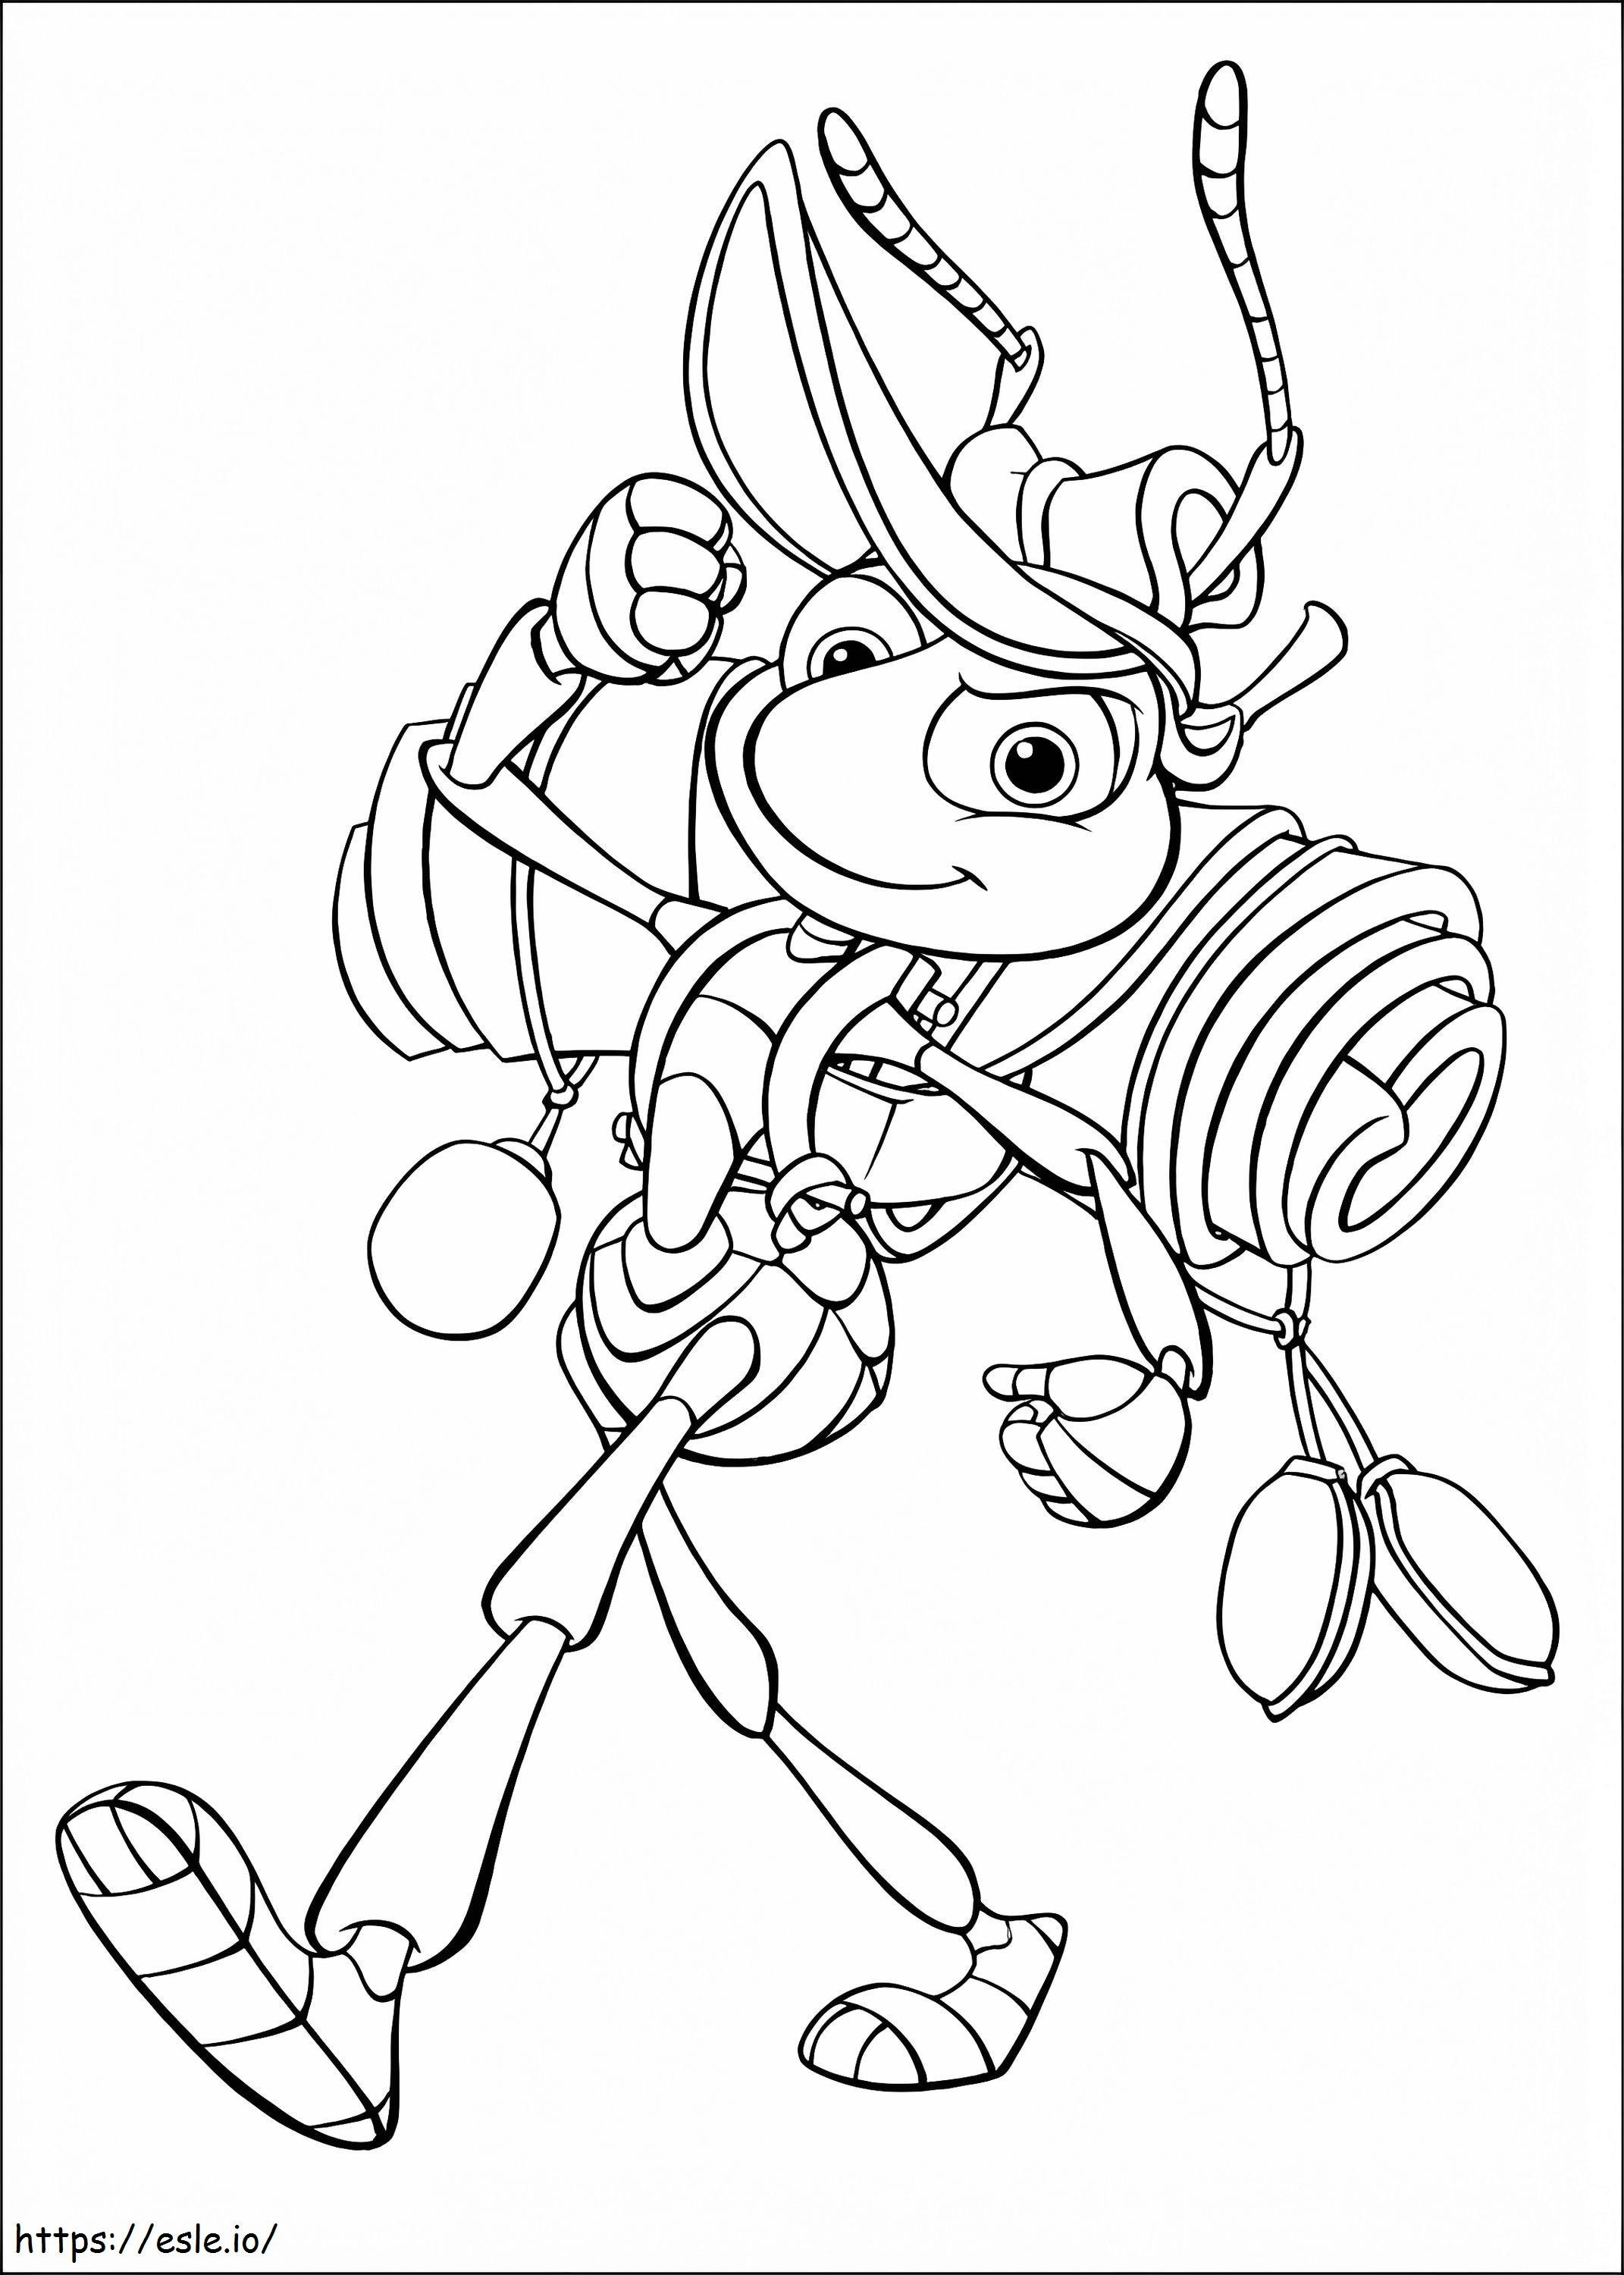 1533346283 Flik Going On Picnic A4 coloring page